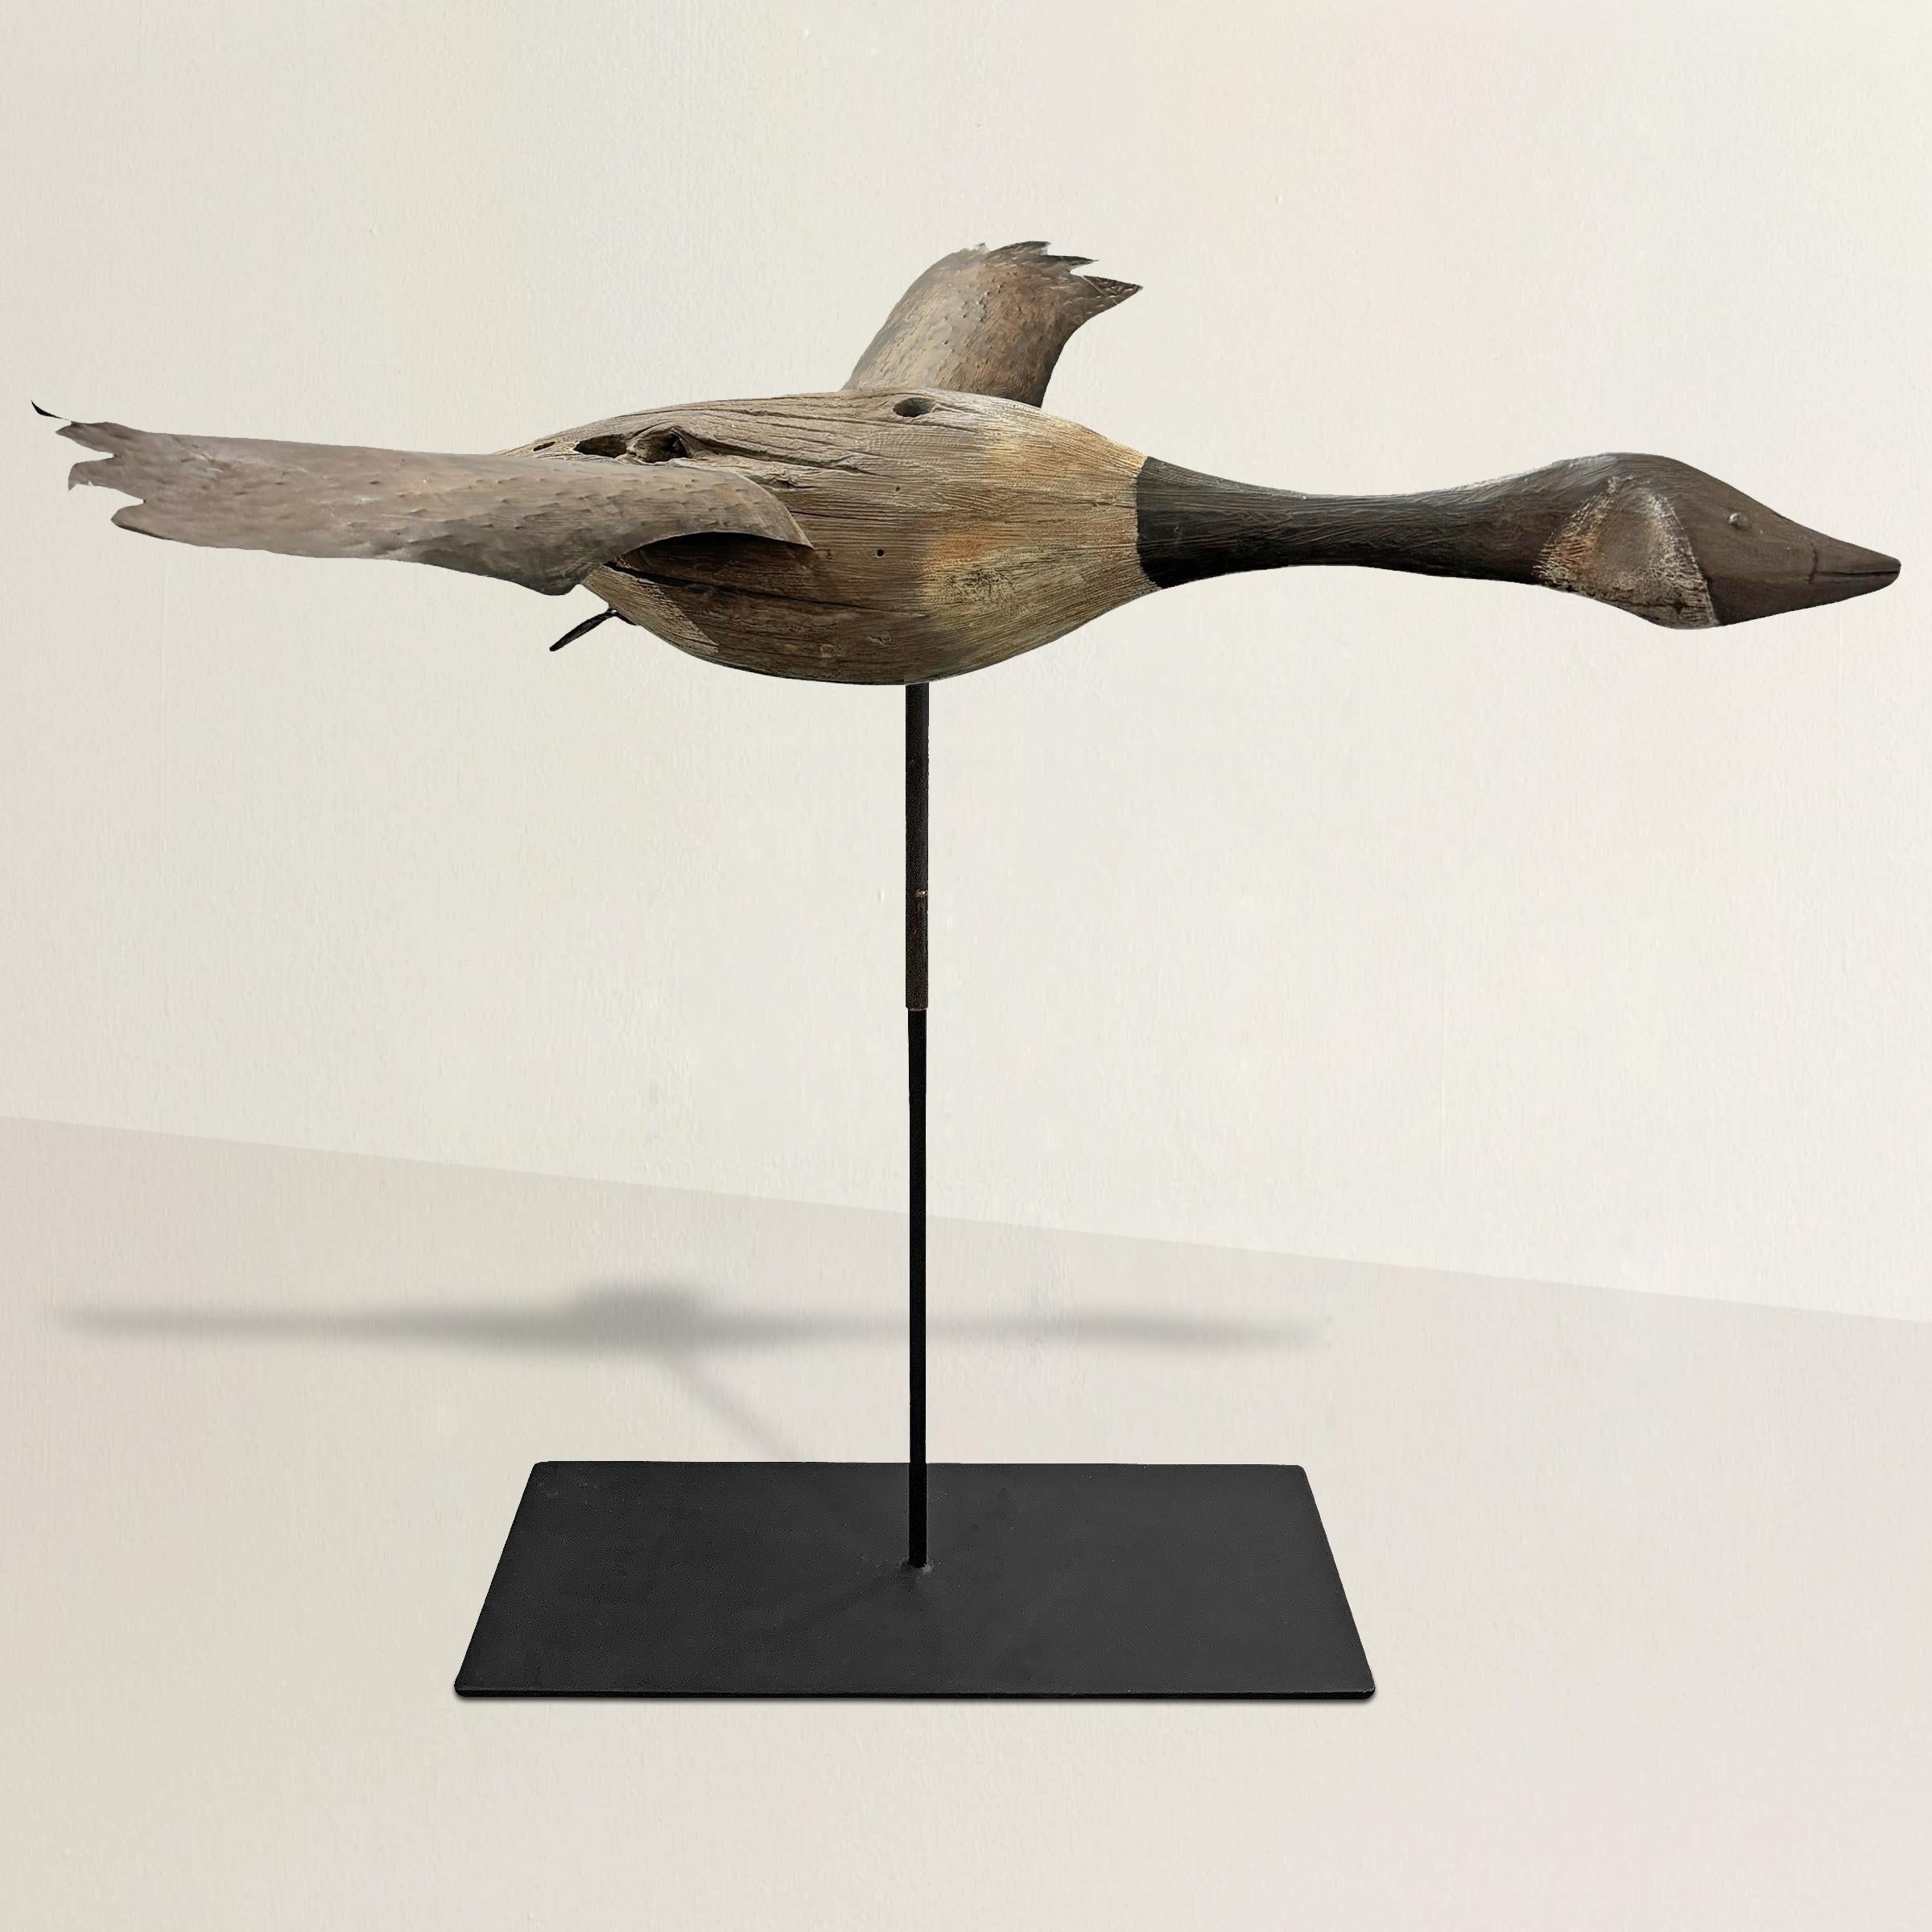 This 20th-century American Folk Art masterpiece is a life-size Canada goose that captures the essence of rural creativity and cultural heritage. Its outstretched wings, crafted from snipped tin, exhibit a sense of dynamic motion, while the body,